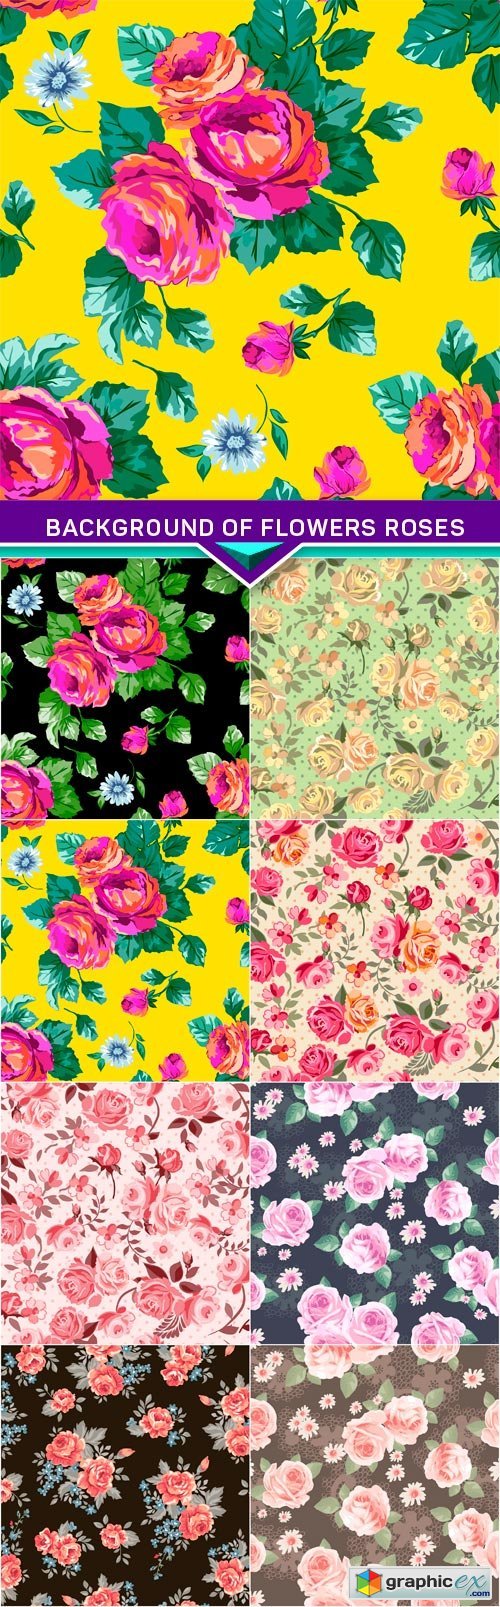 Background of flowers roses 8x EPS